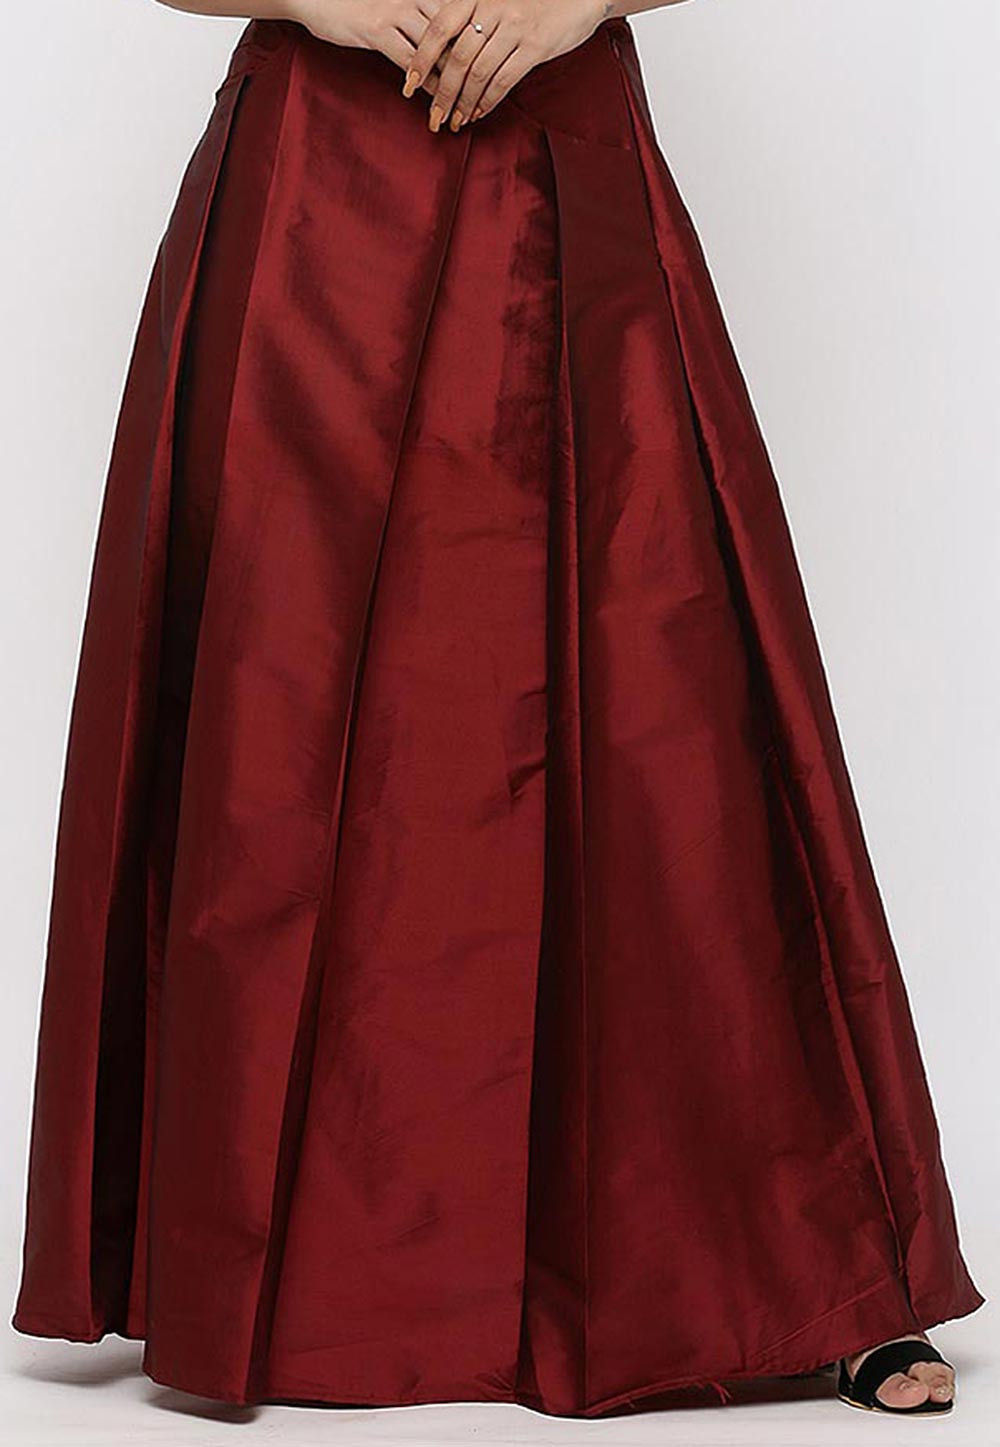 Aggregate more than 83 red silk pleated skirt